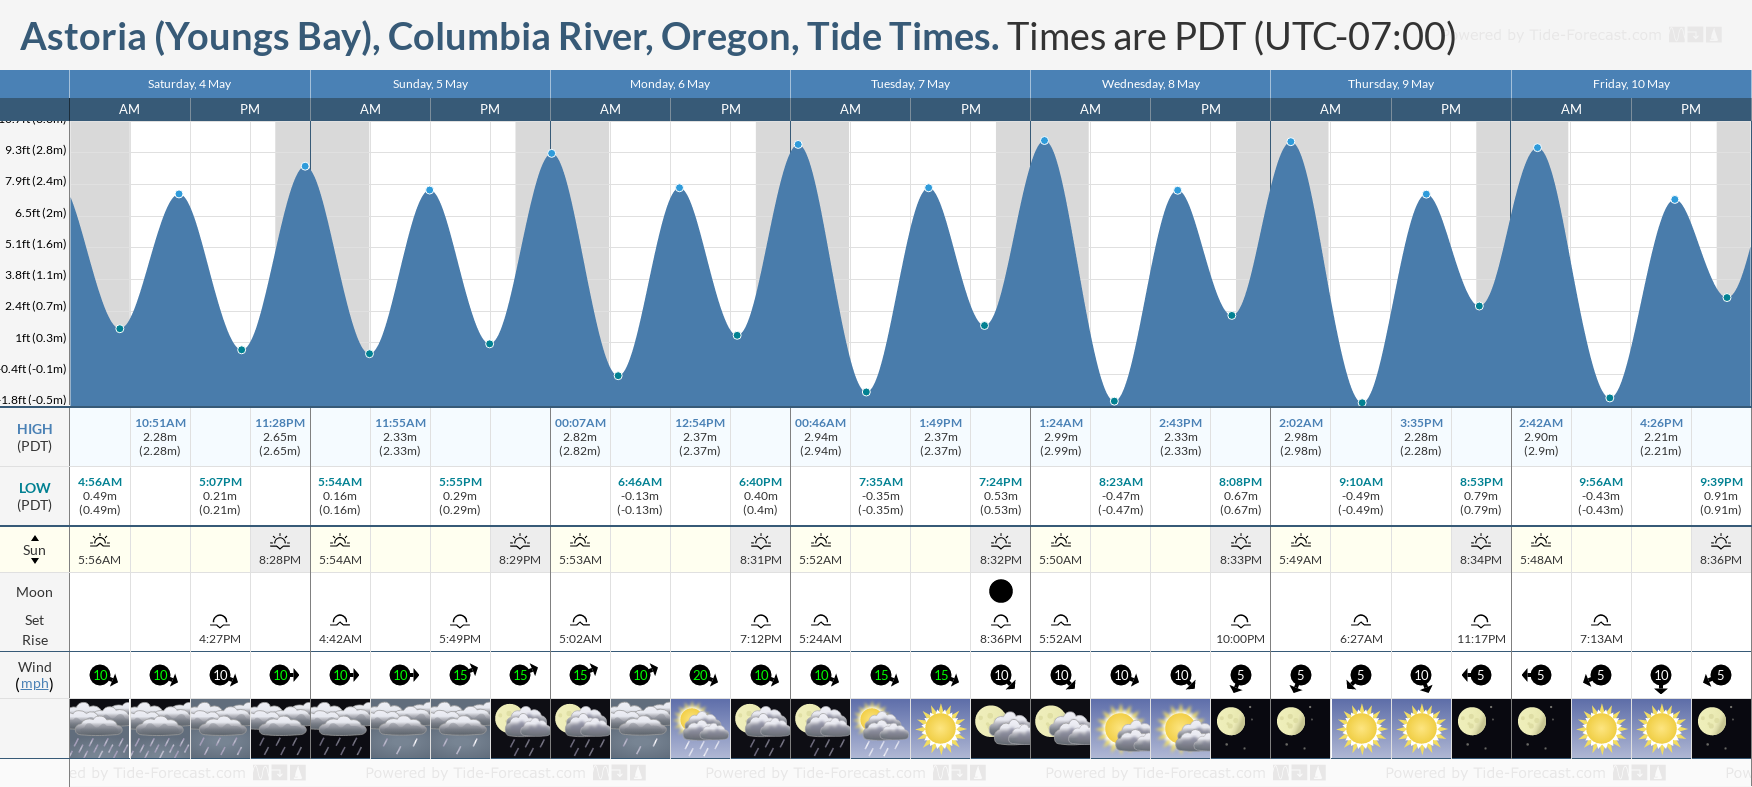 Astoria (Youngs Bay), Columbia River, Oregon Tide Chart including high and low tide tide times for the next 7 days